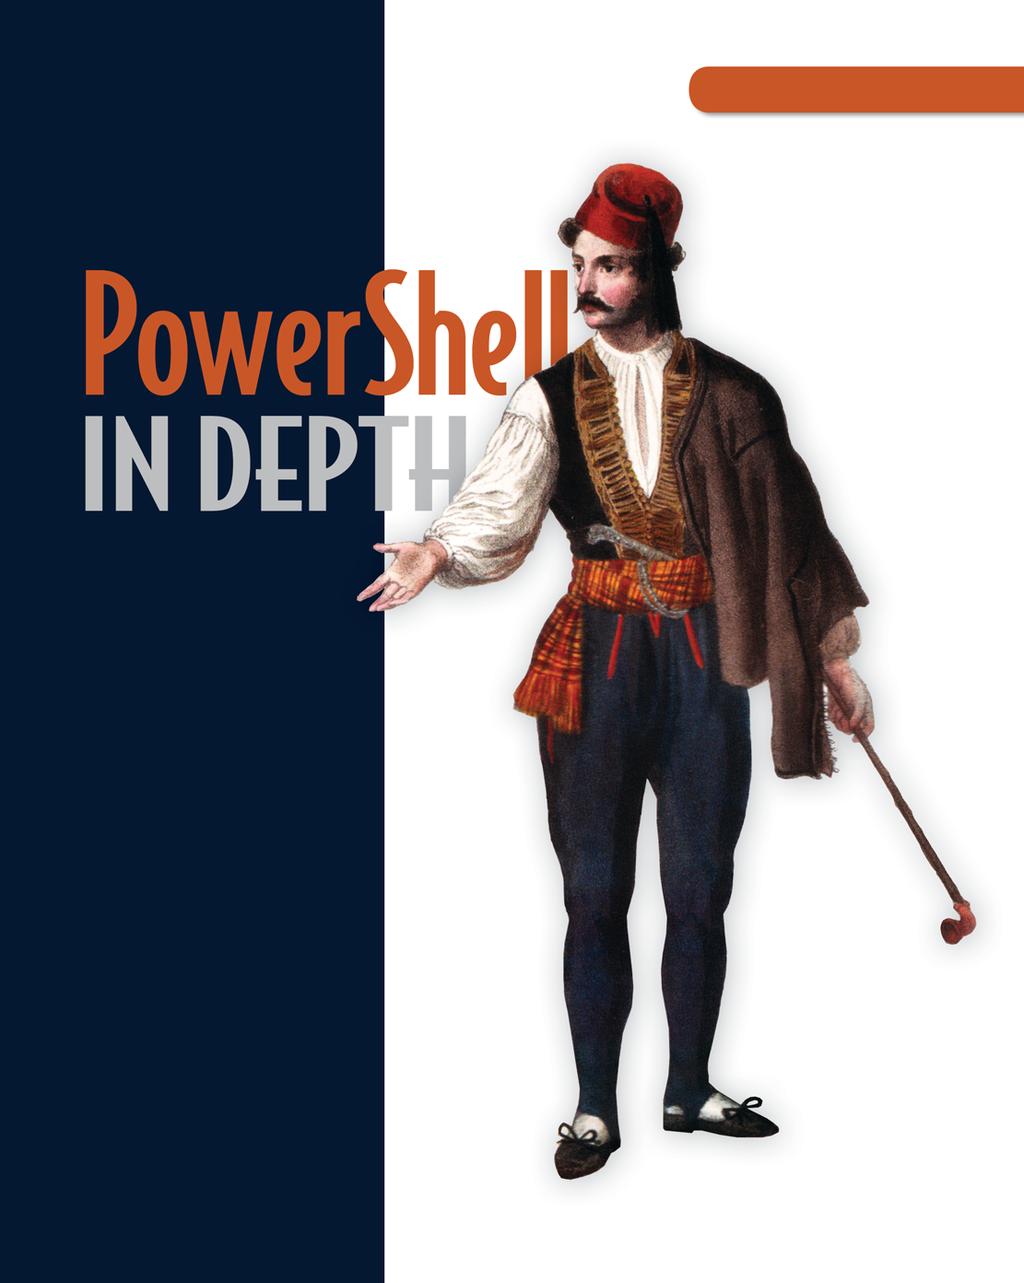 S AMPLE CHAPTER Covers PowerShell 3.